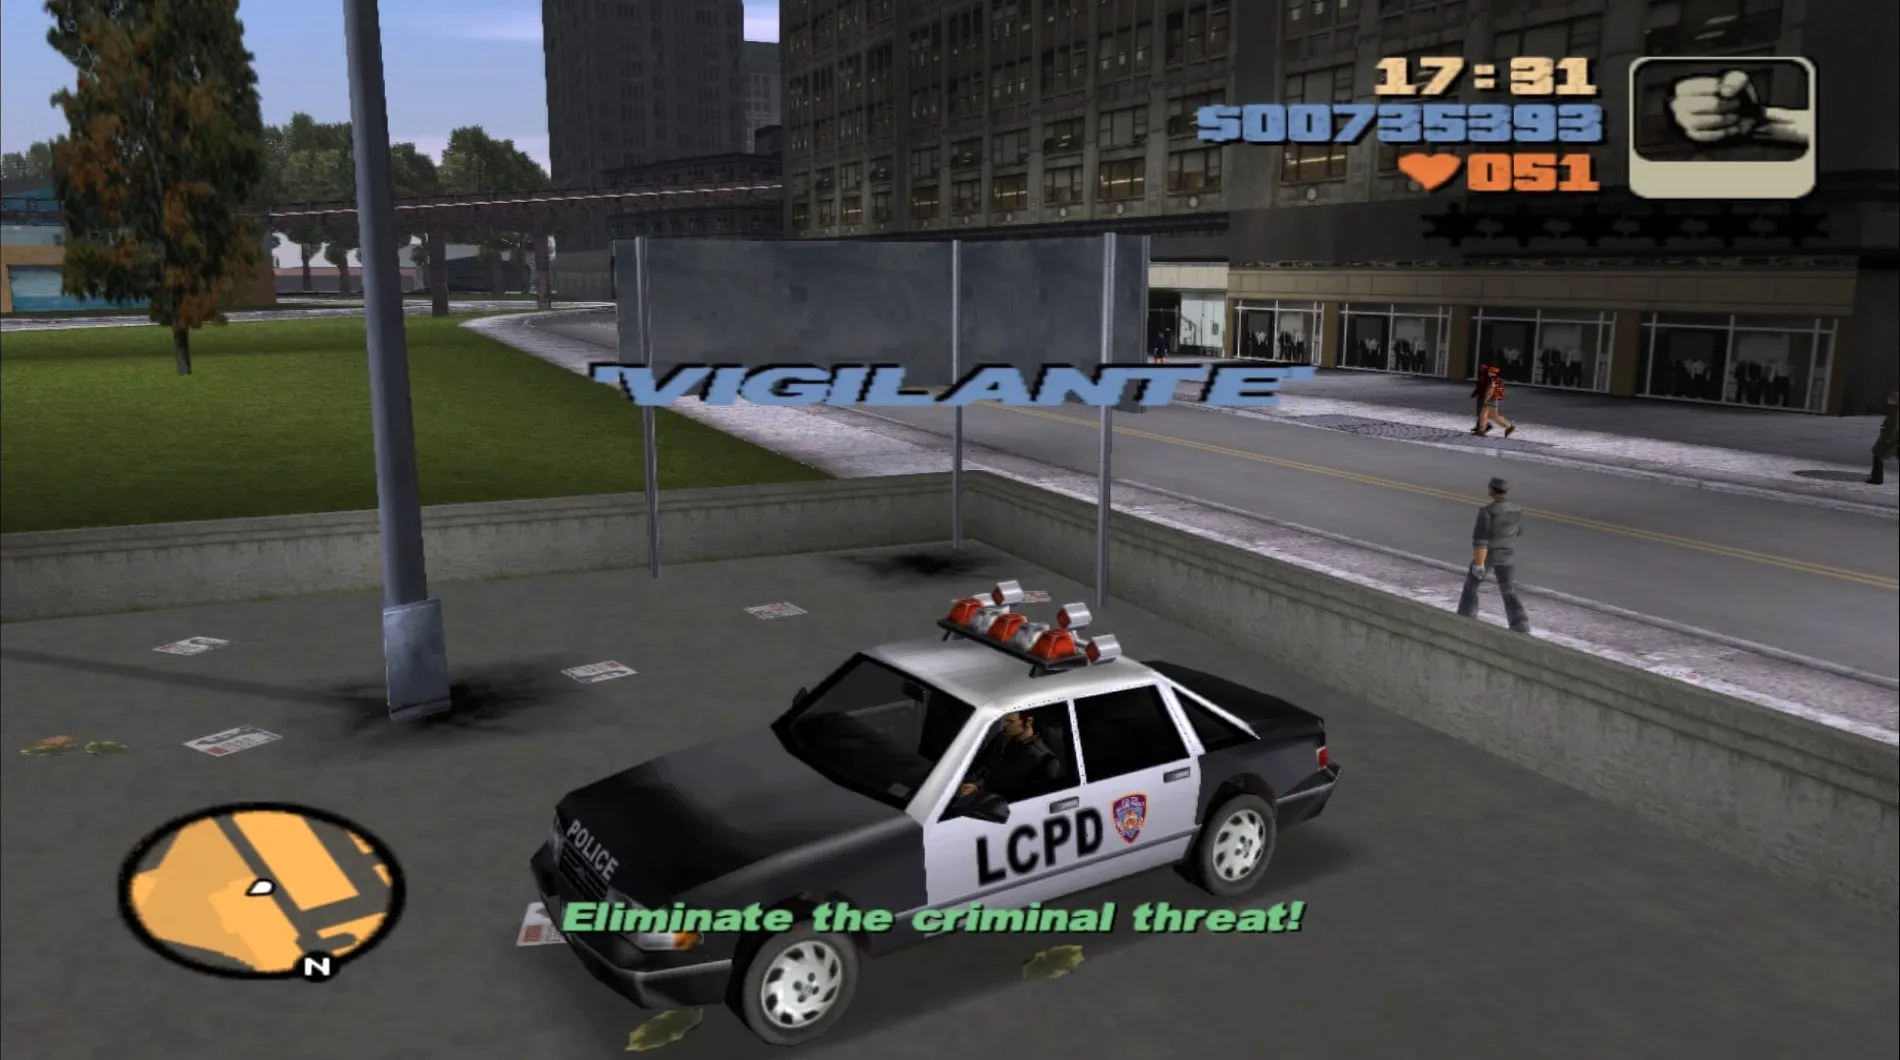 Grand Theft Auto III Trophy Guide •